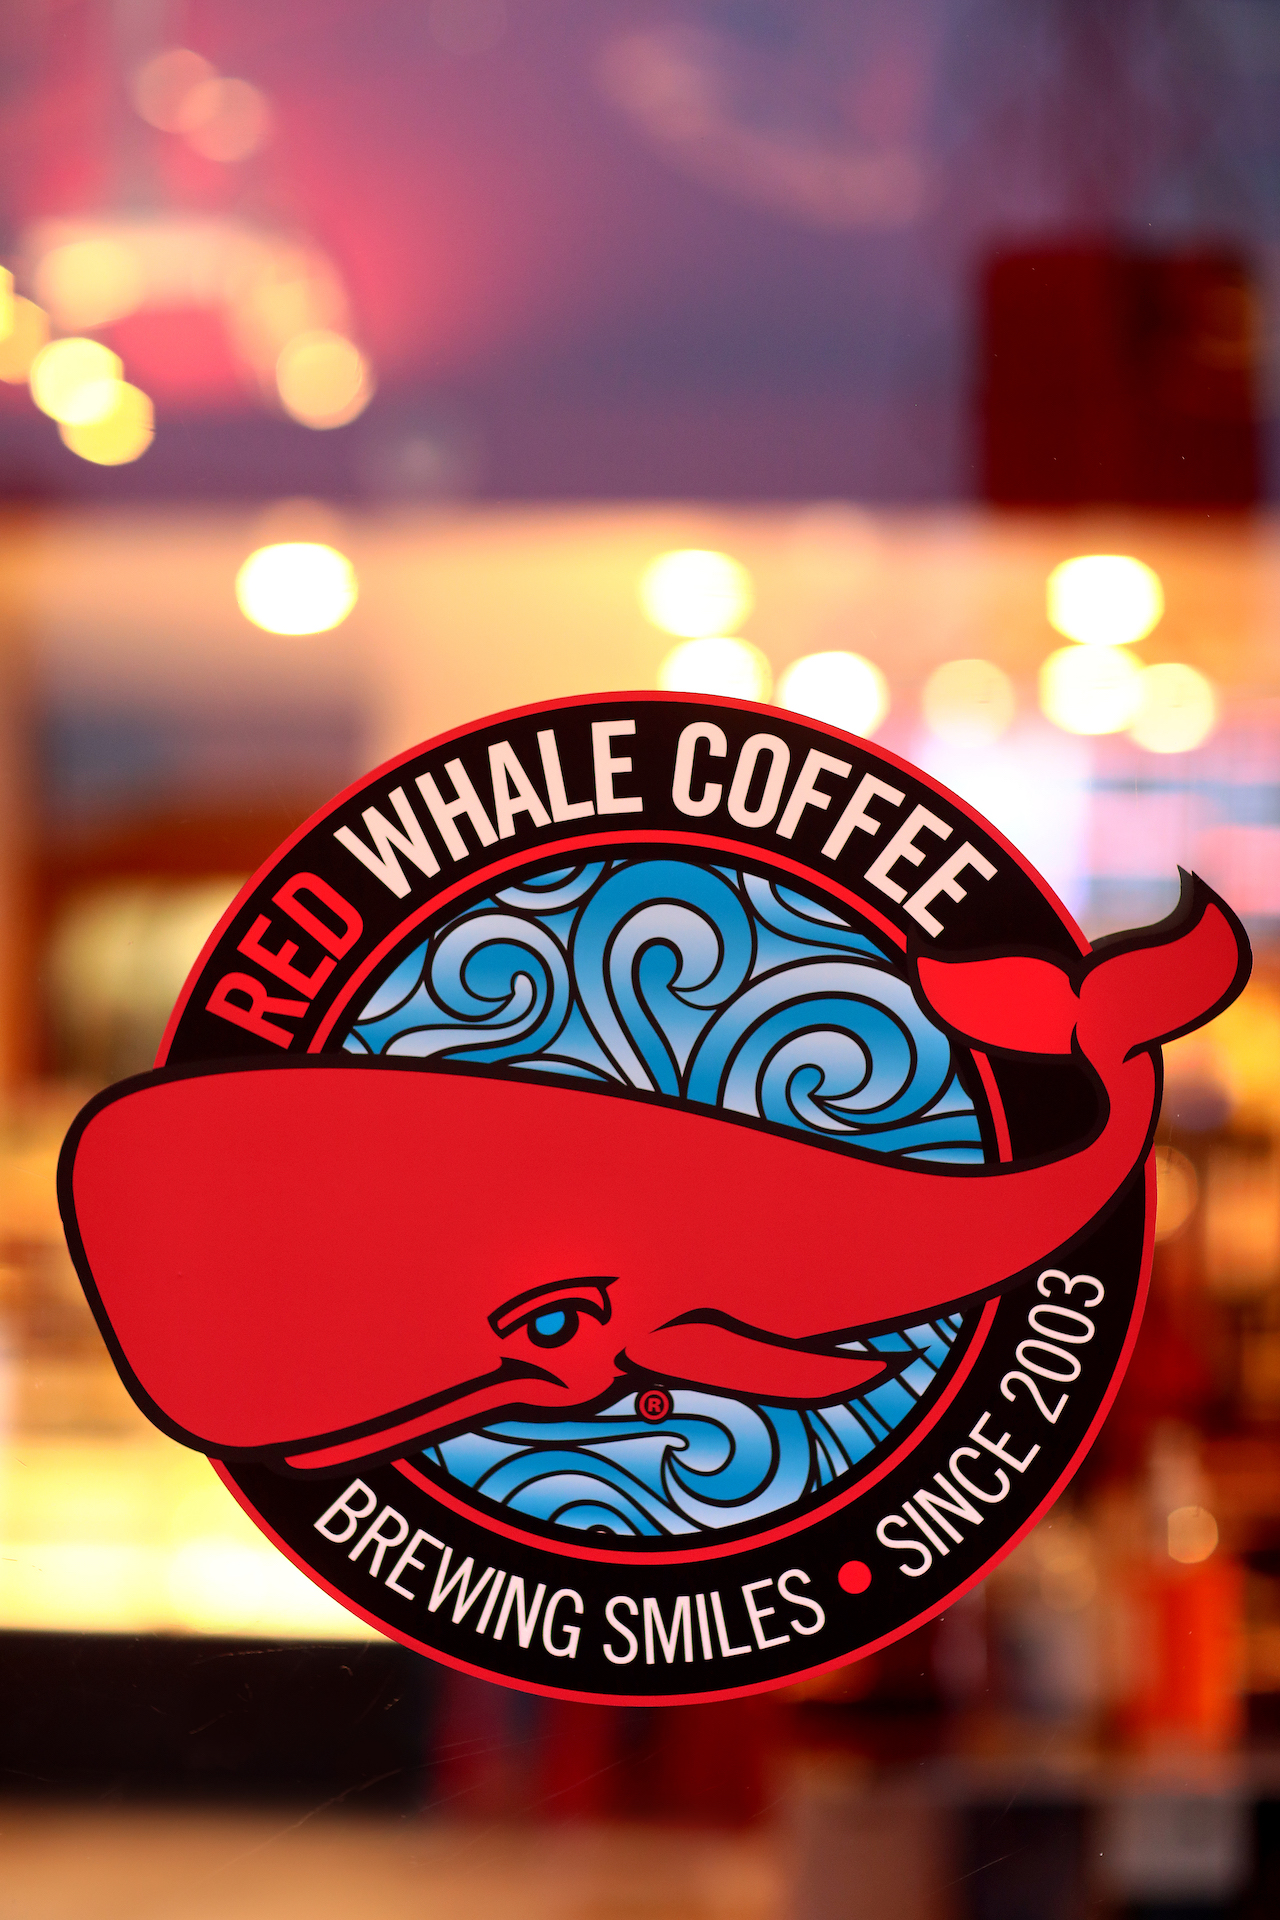 Red Whatl Coffee window graphic